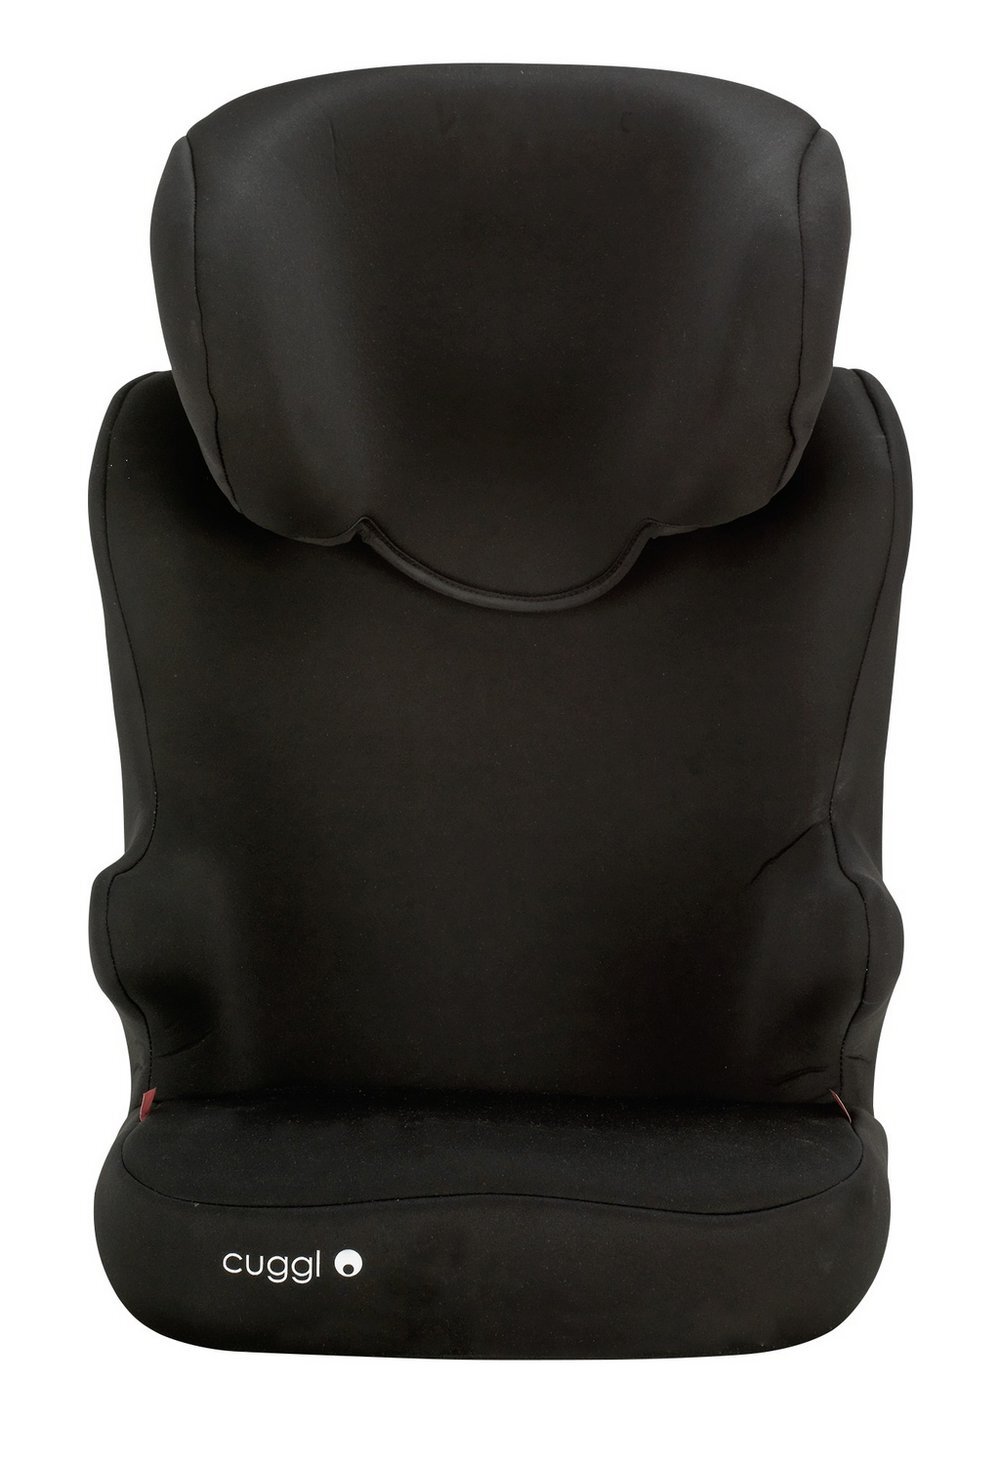 BRAND NEW CUGGL SWALLOW GROUP 2/3 BABY CAR SEAT 18PCS £12.49each